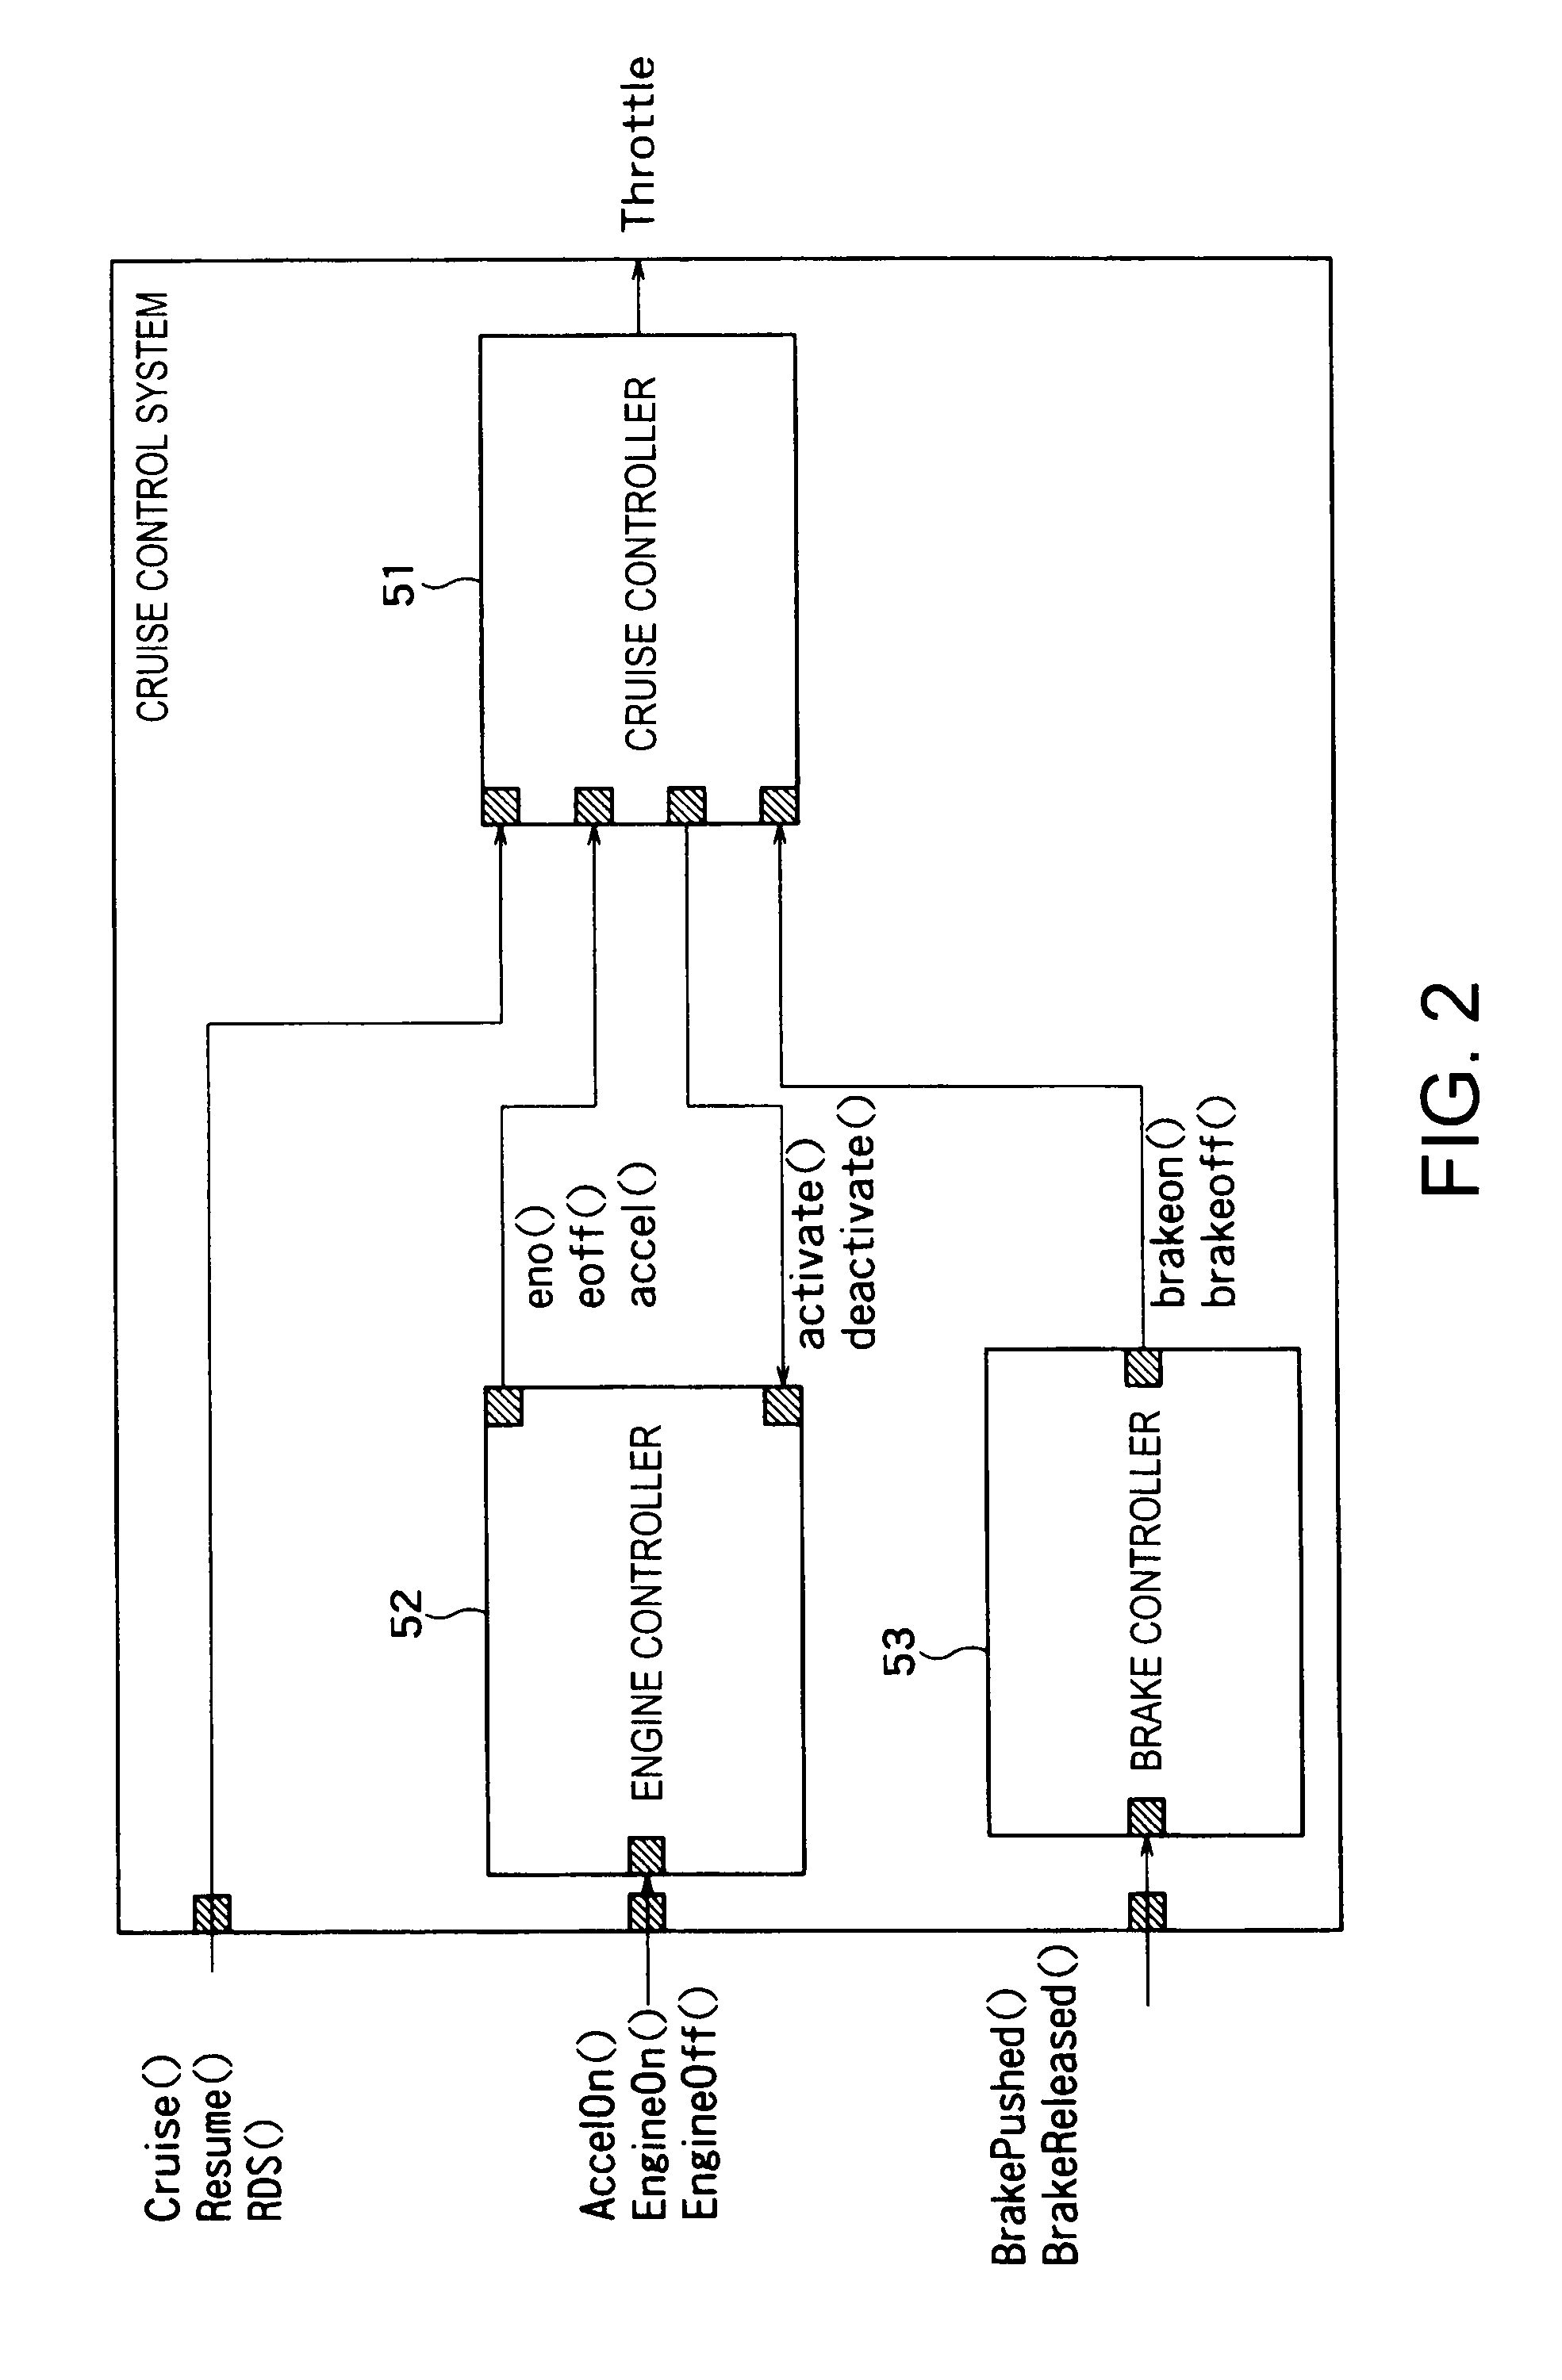 Apparatus and method for designing a system specification for testability